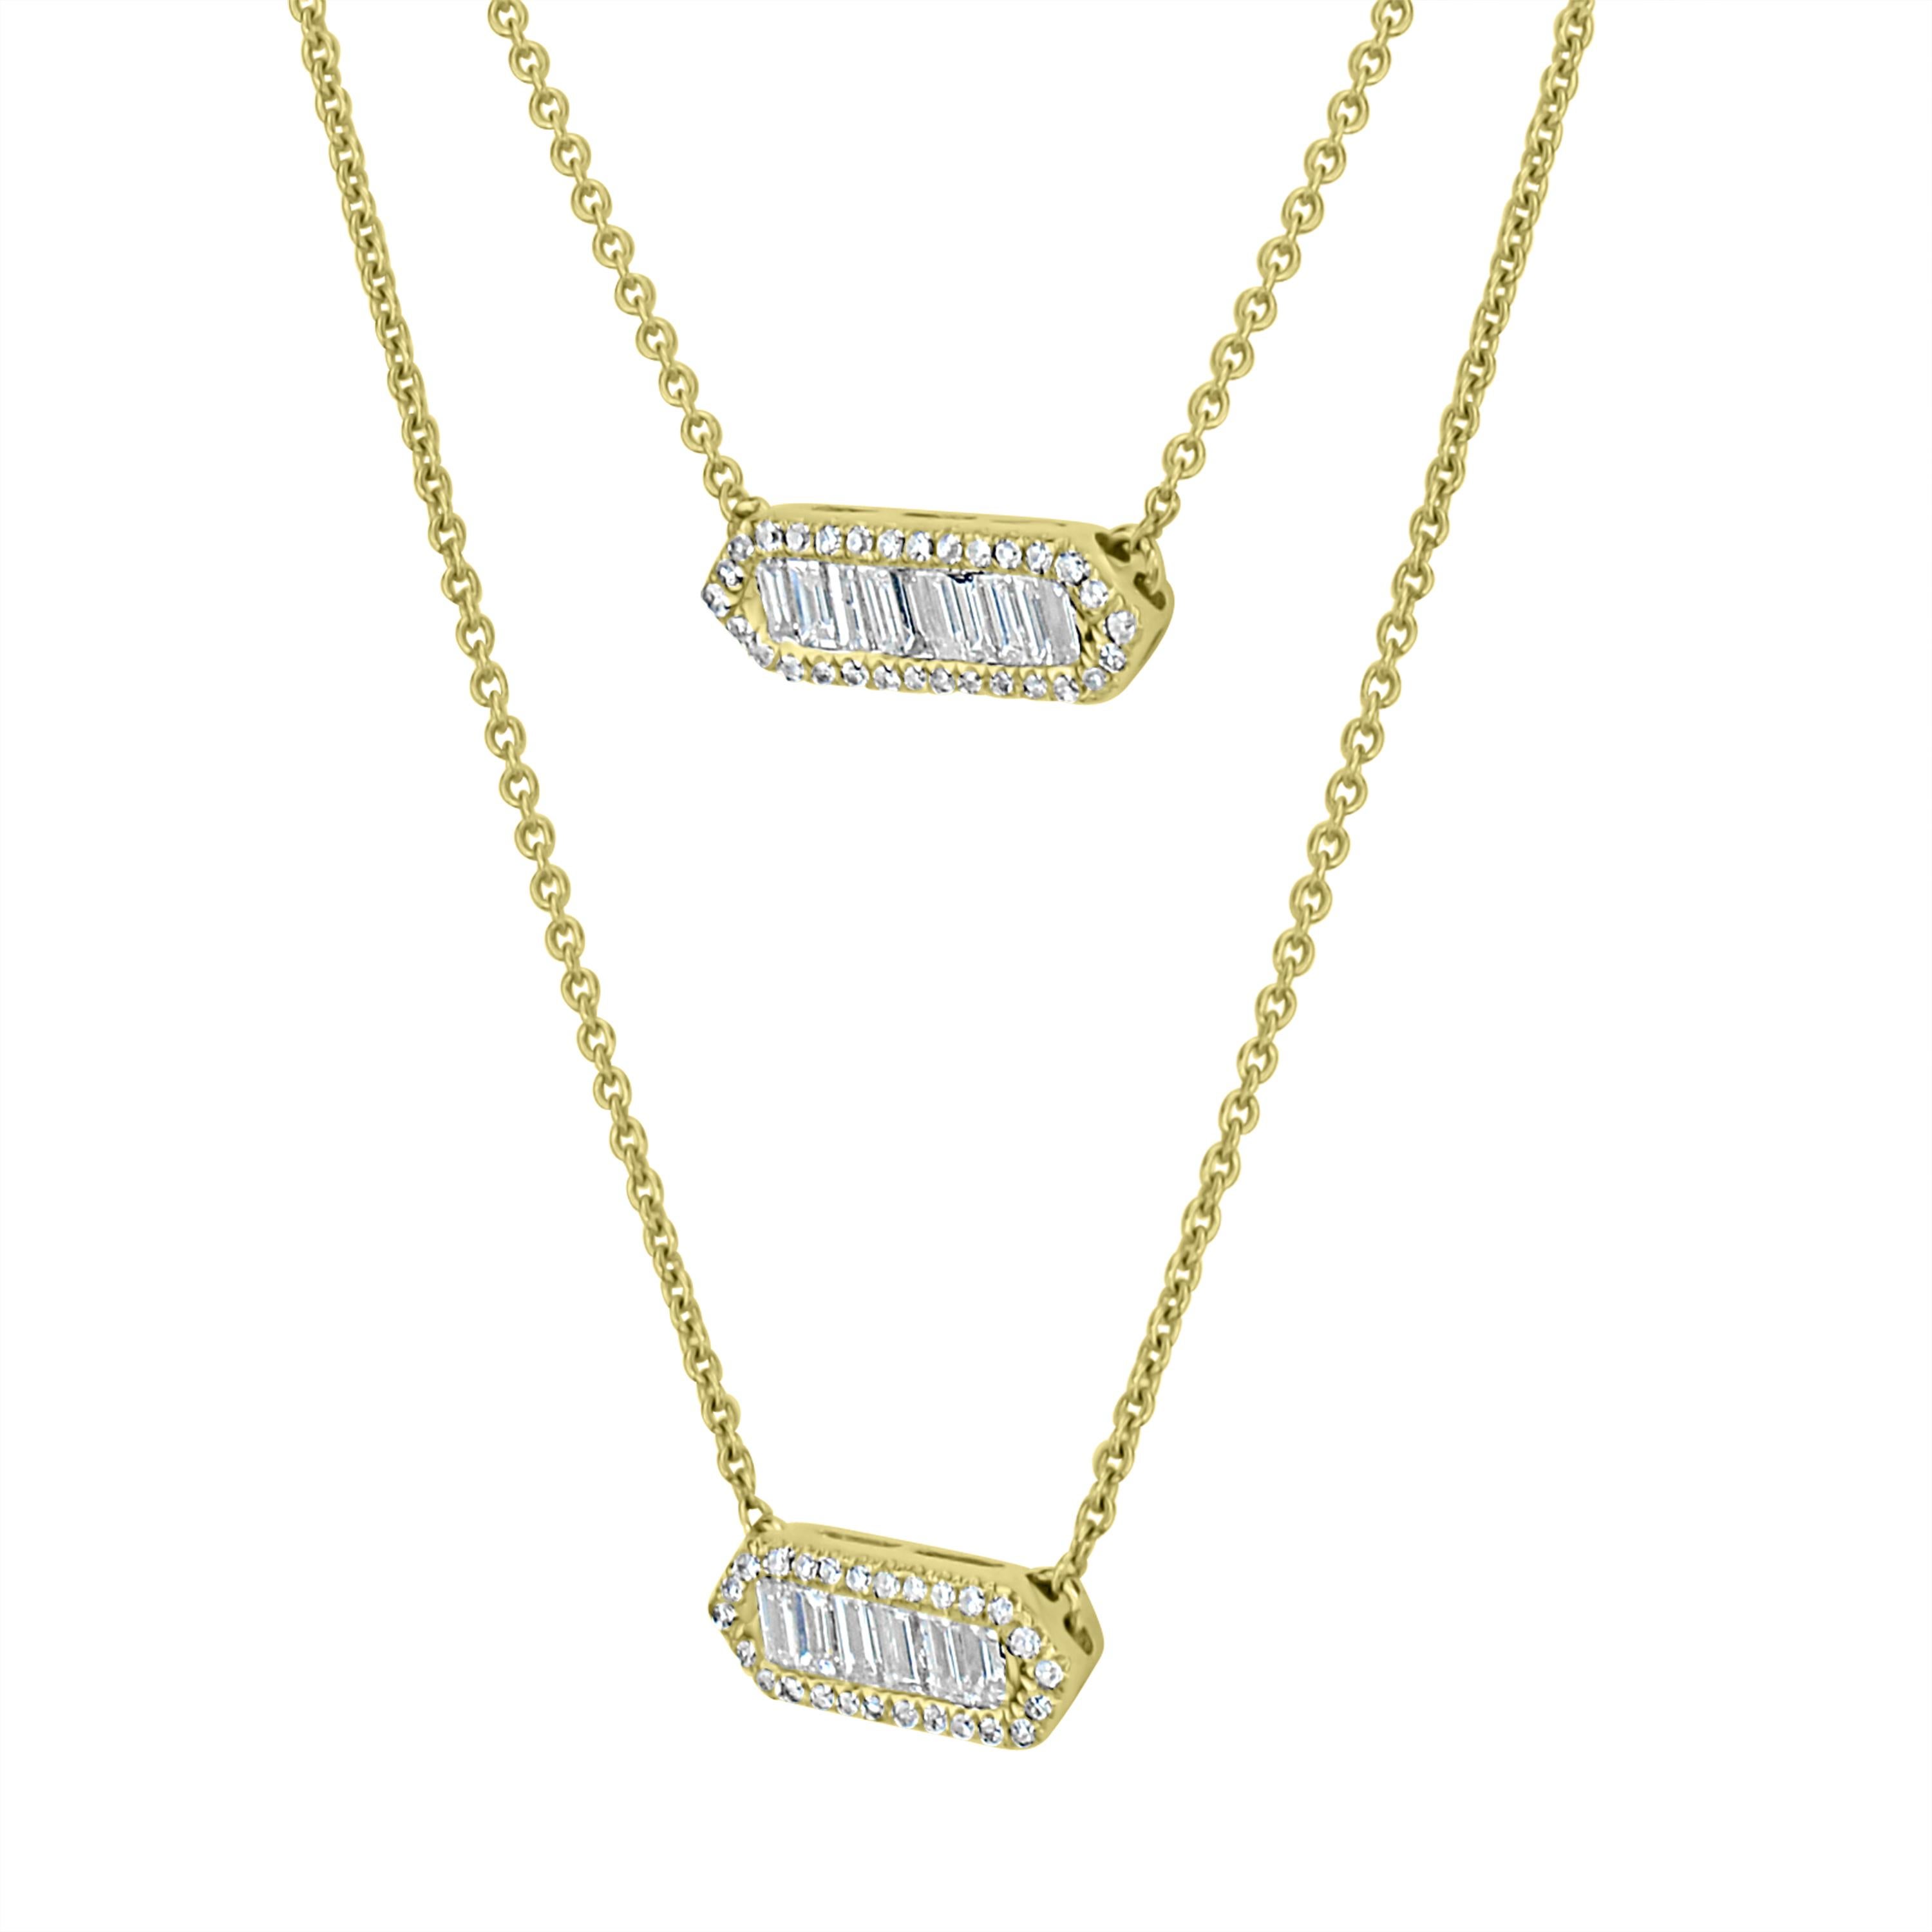 This Luxle dazzling diamond double-strand baguette necklace will elevate your look to new heights. This necklace has two bar motifs that are set with 56 round-cut diamonds and 17 baguettes that fall gracefully down your throat. The diamonds have a